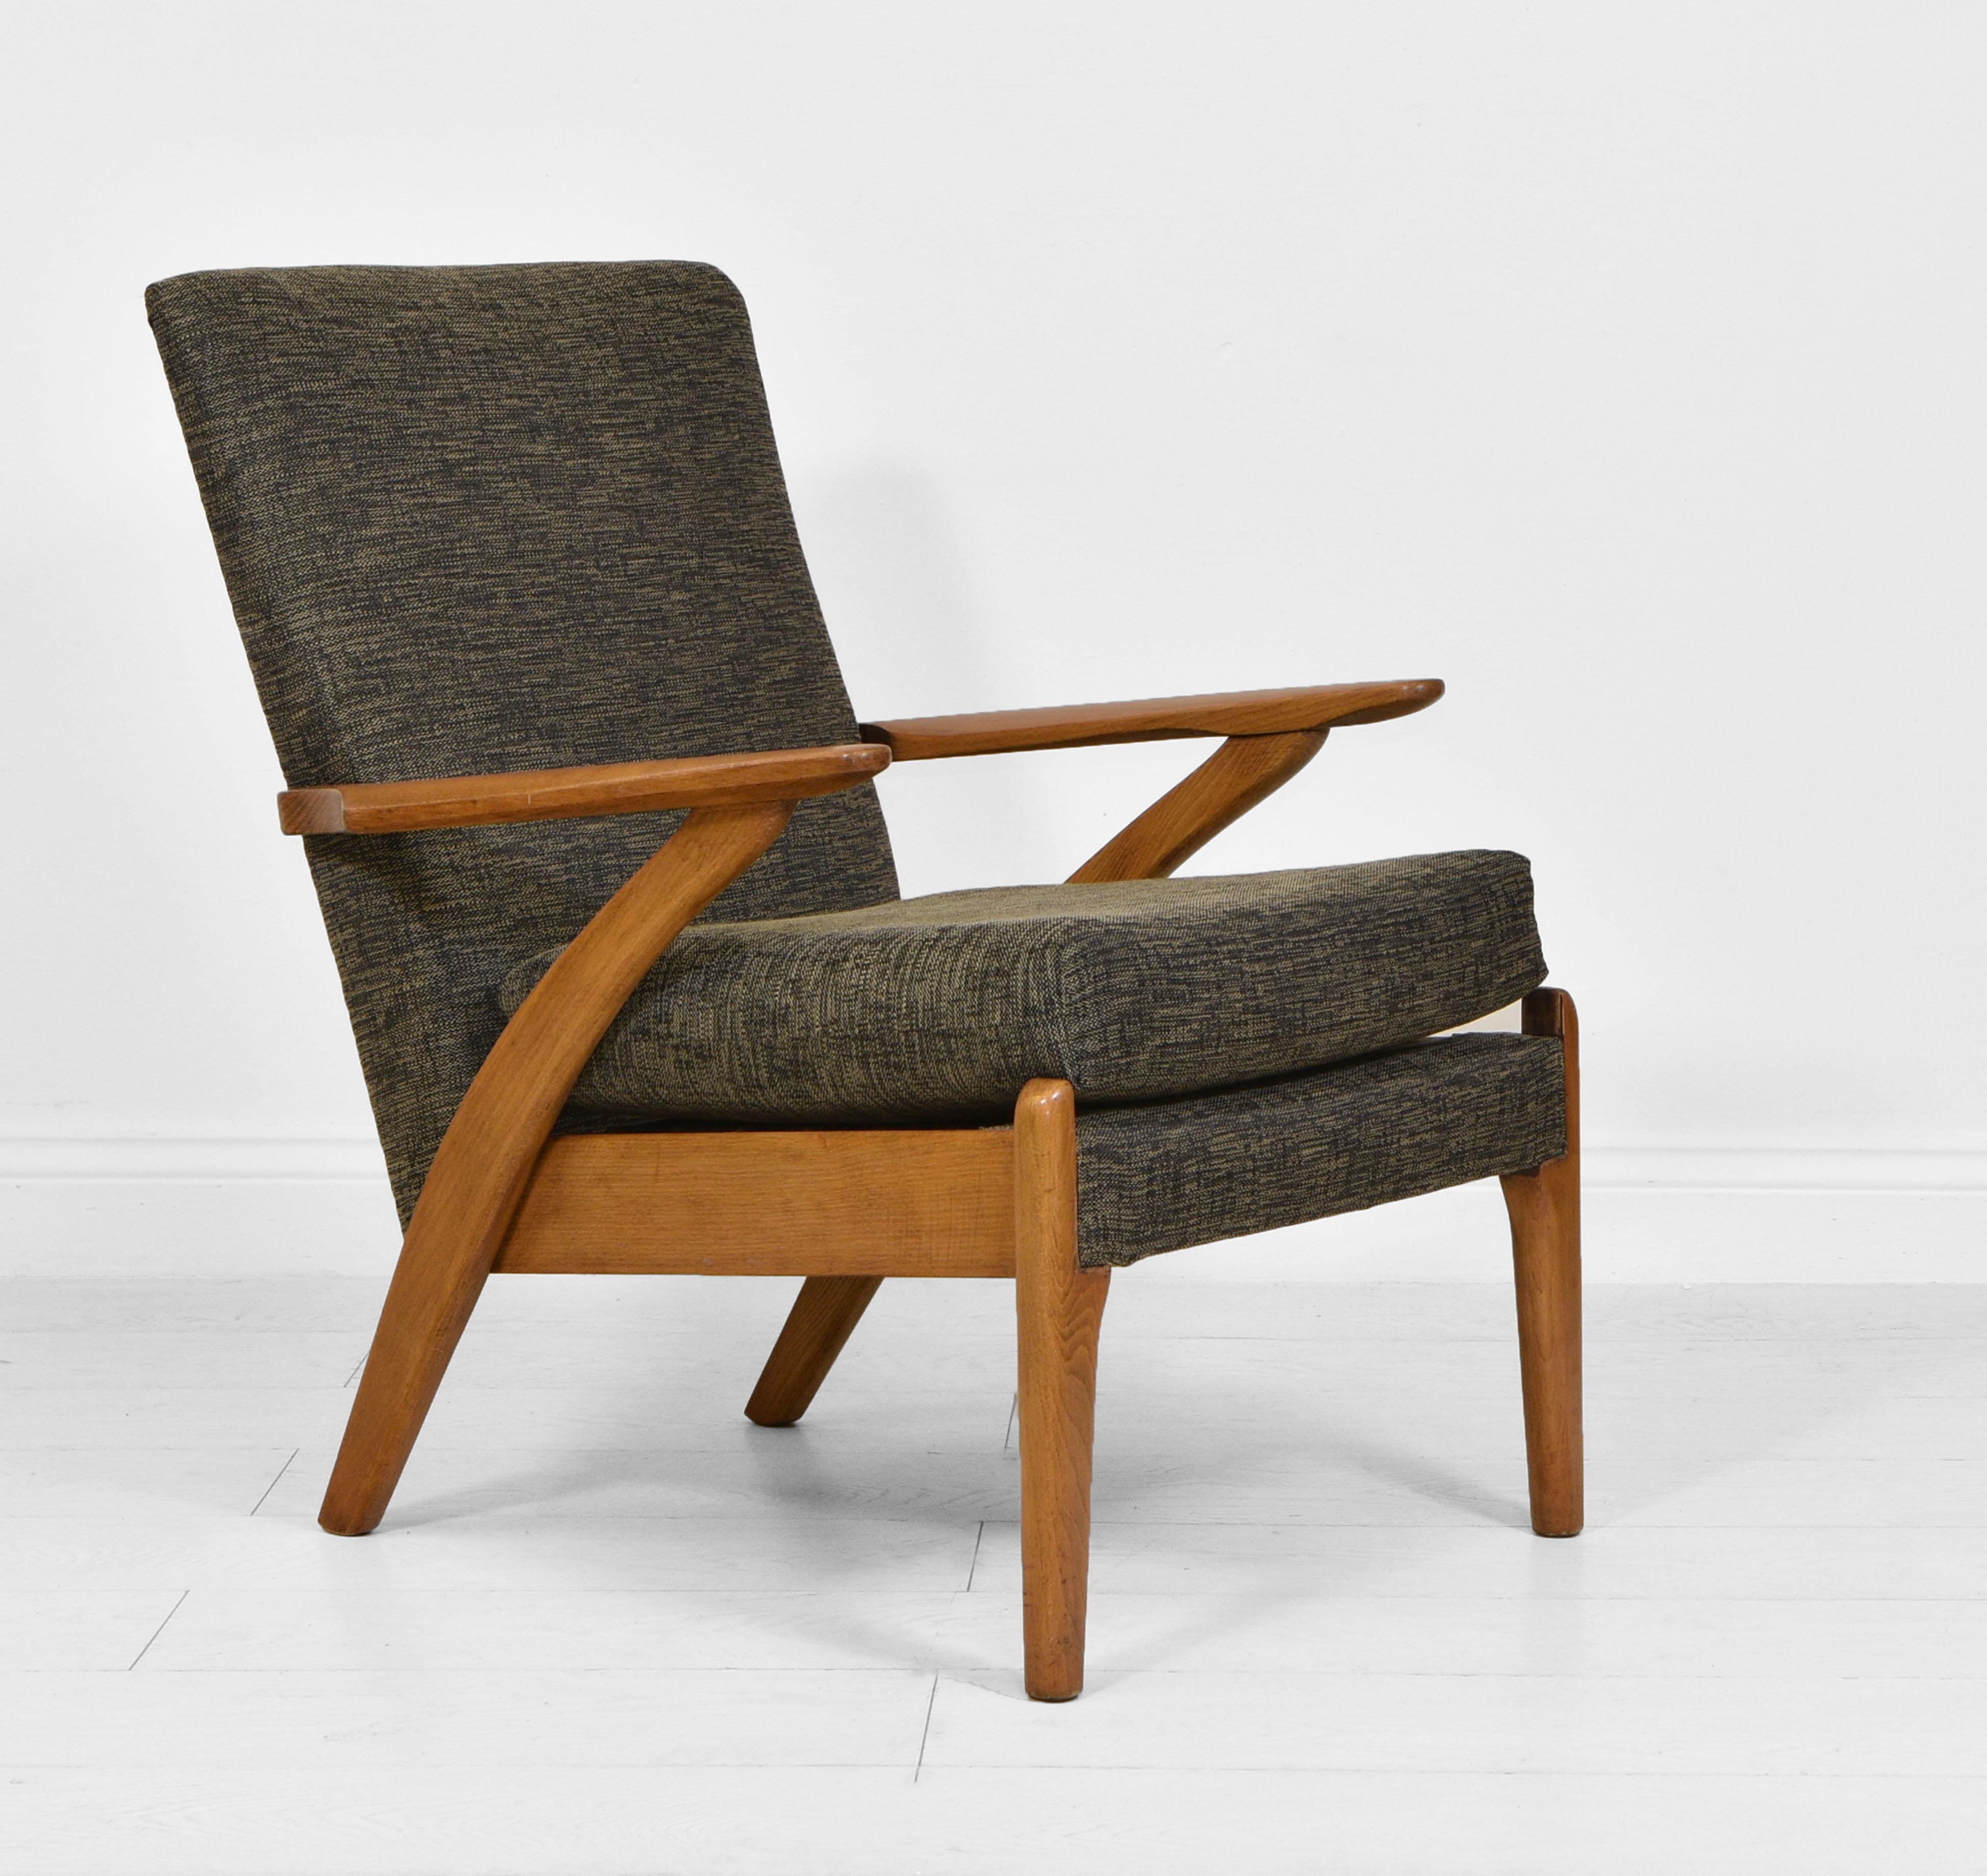 A stylish mid-century armchair made by Parker Knoll. Circa 1950. Sought after design 900/6

The armchair has been recently reupholstered, along with a new foam cushion.

Very sturdy with no loose joints or damage. There are some light marks to